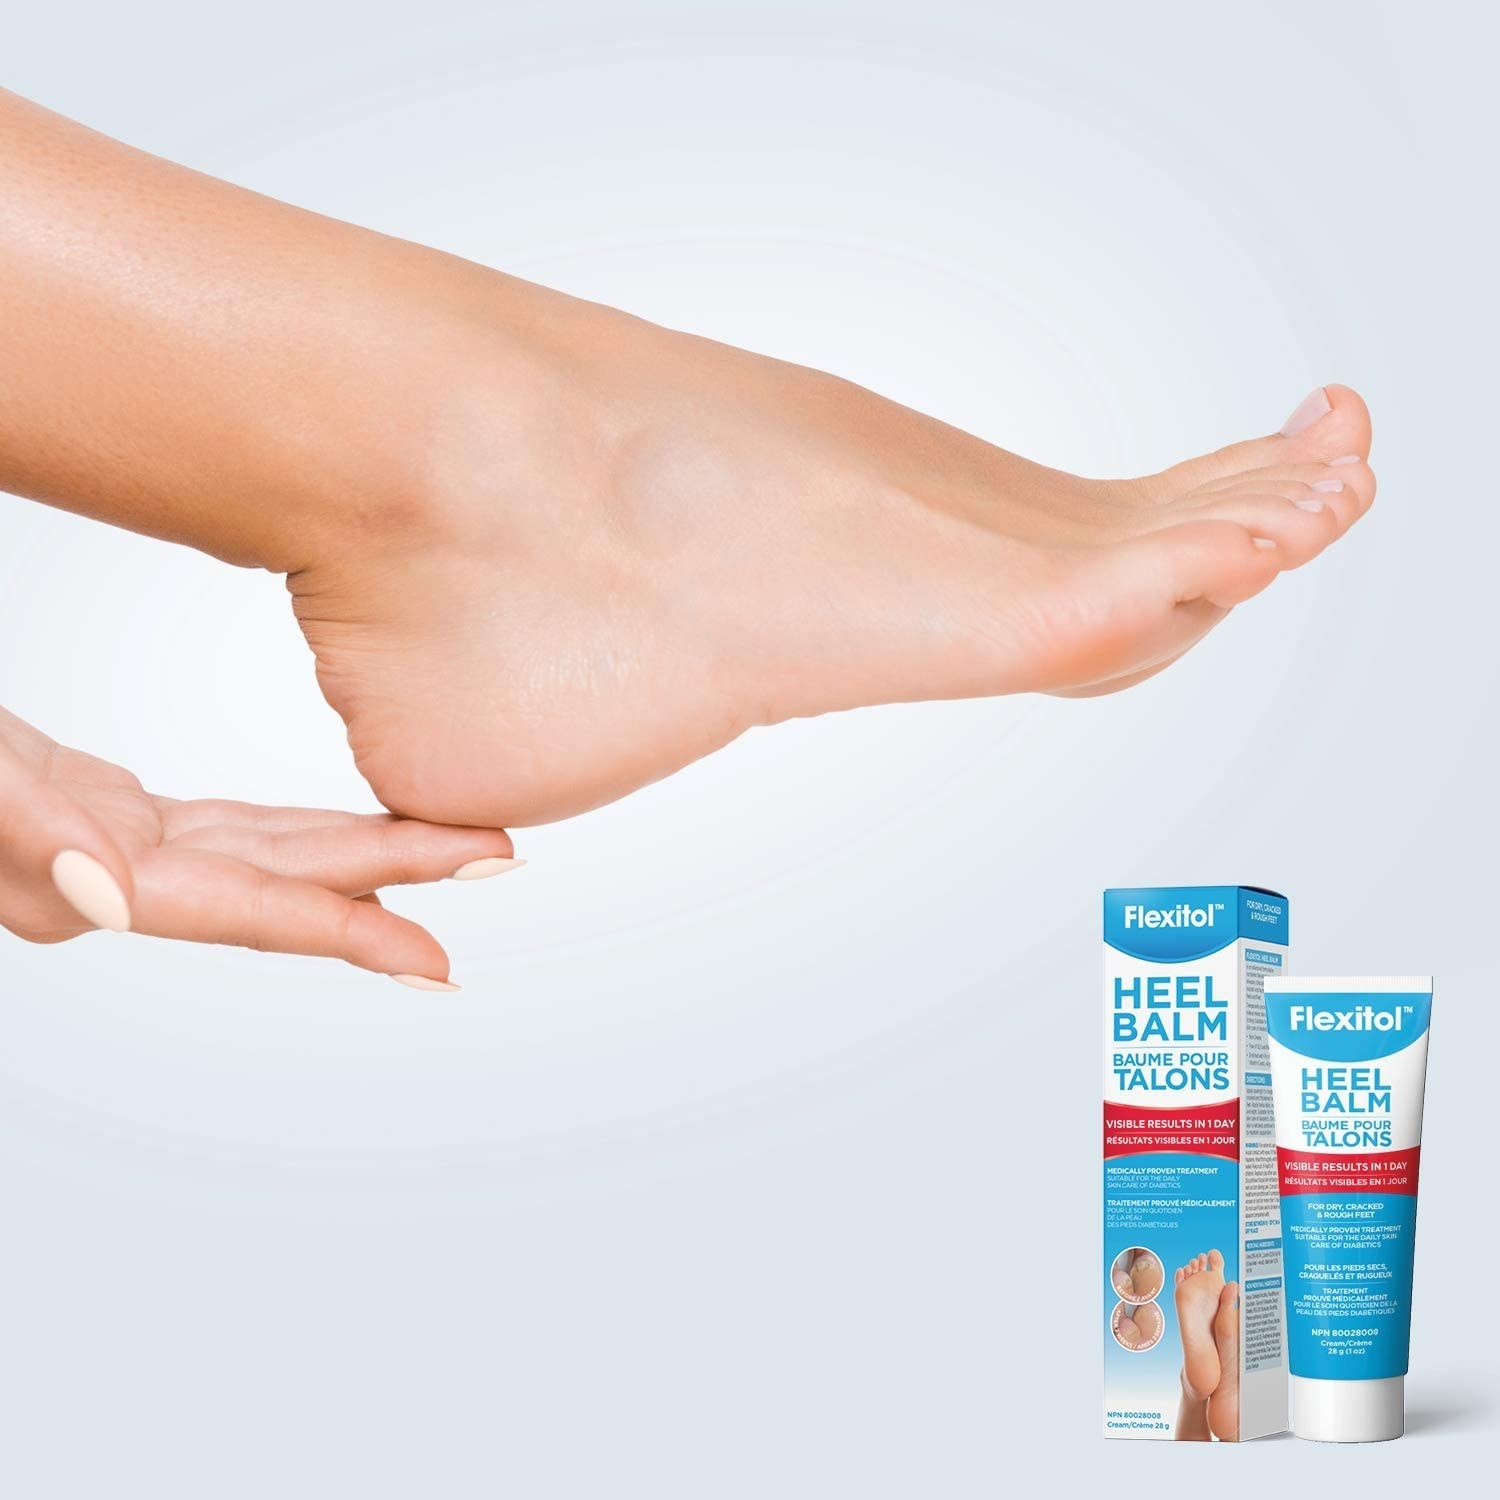 a person using the heel balm on their feet